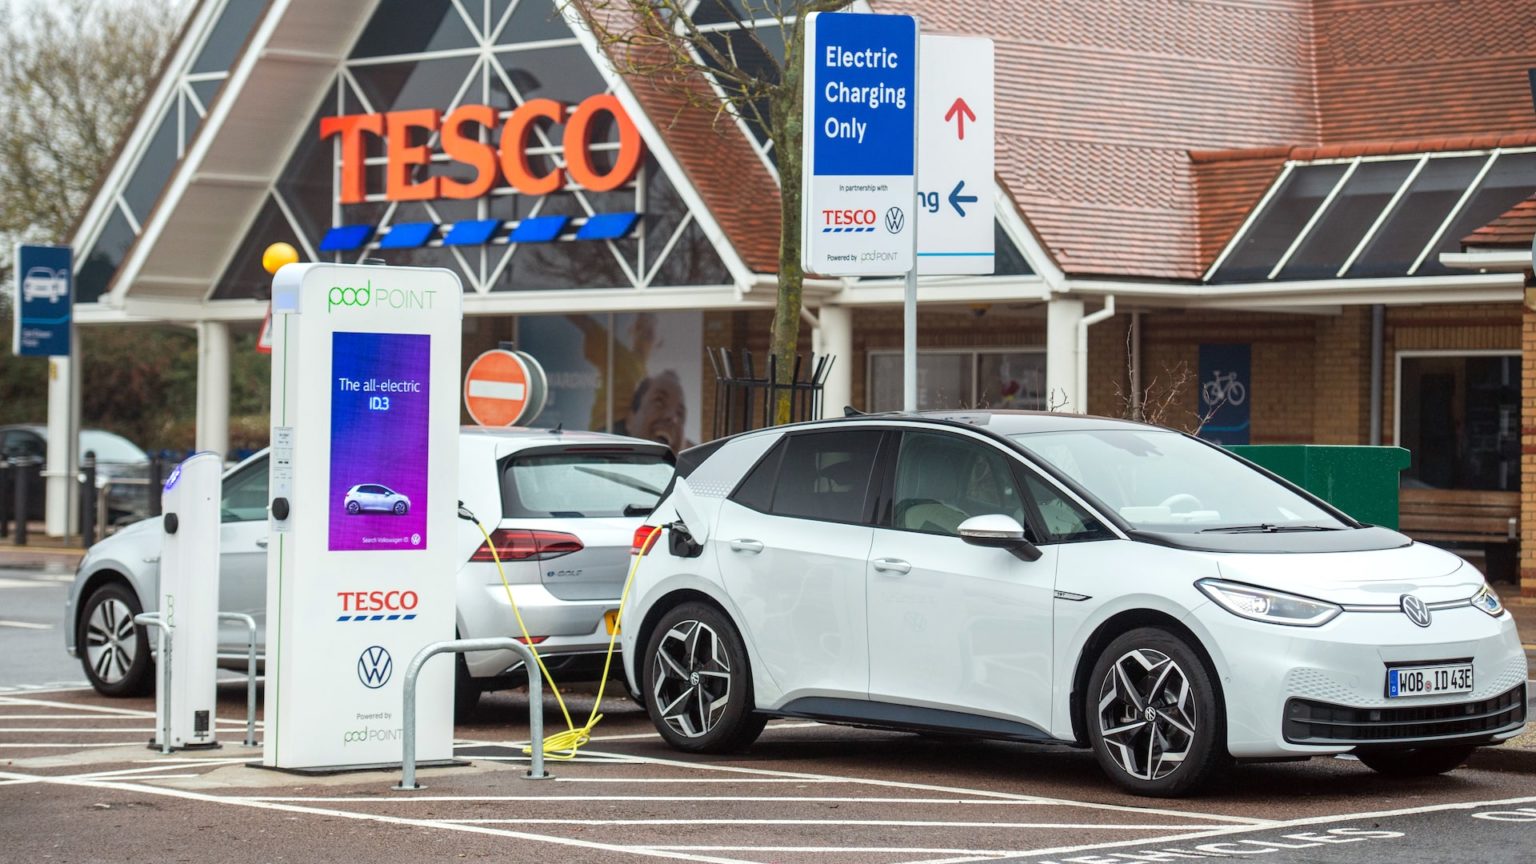 Tesco electric car charging network expands to 600 UK stores